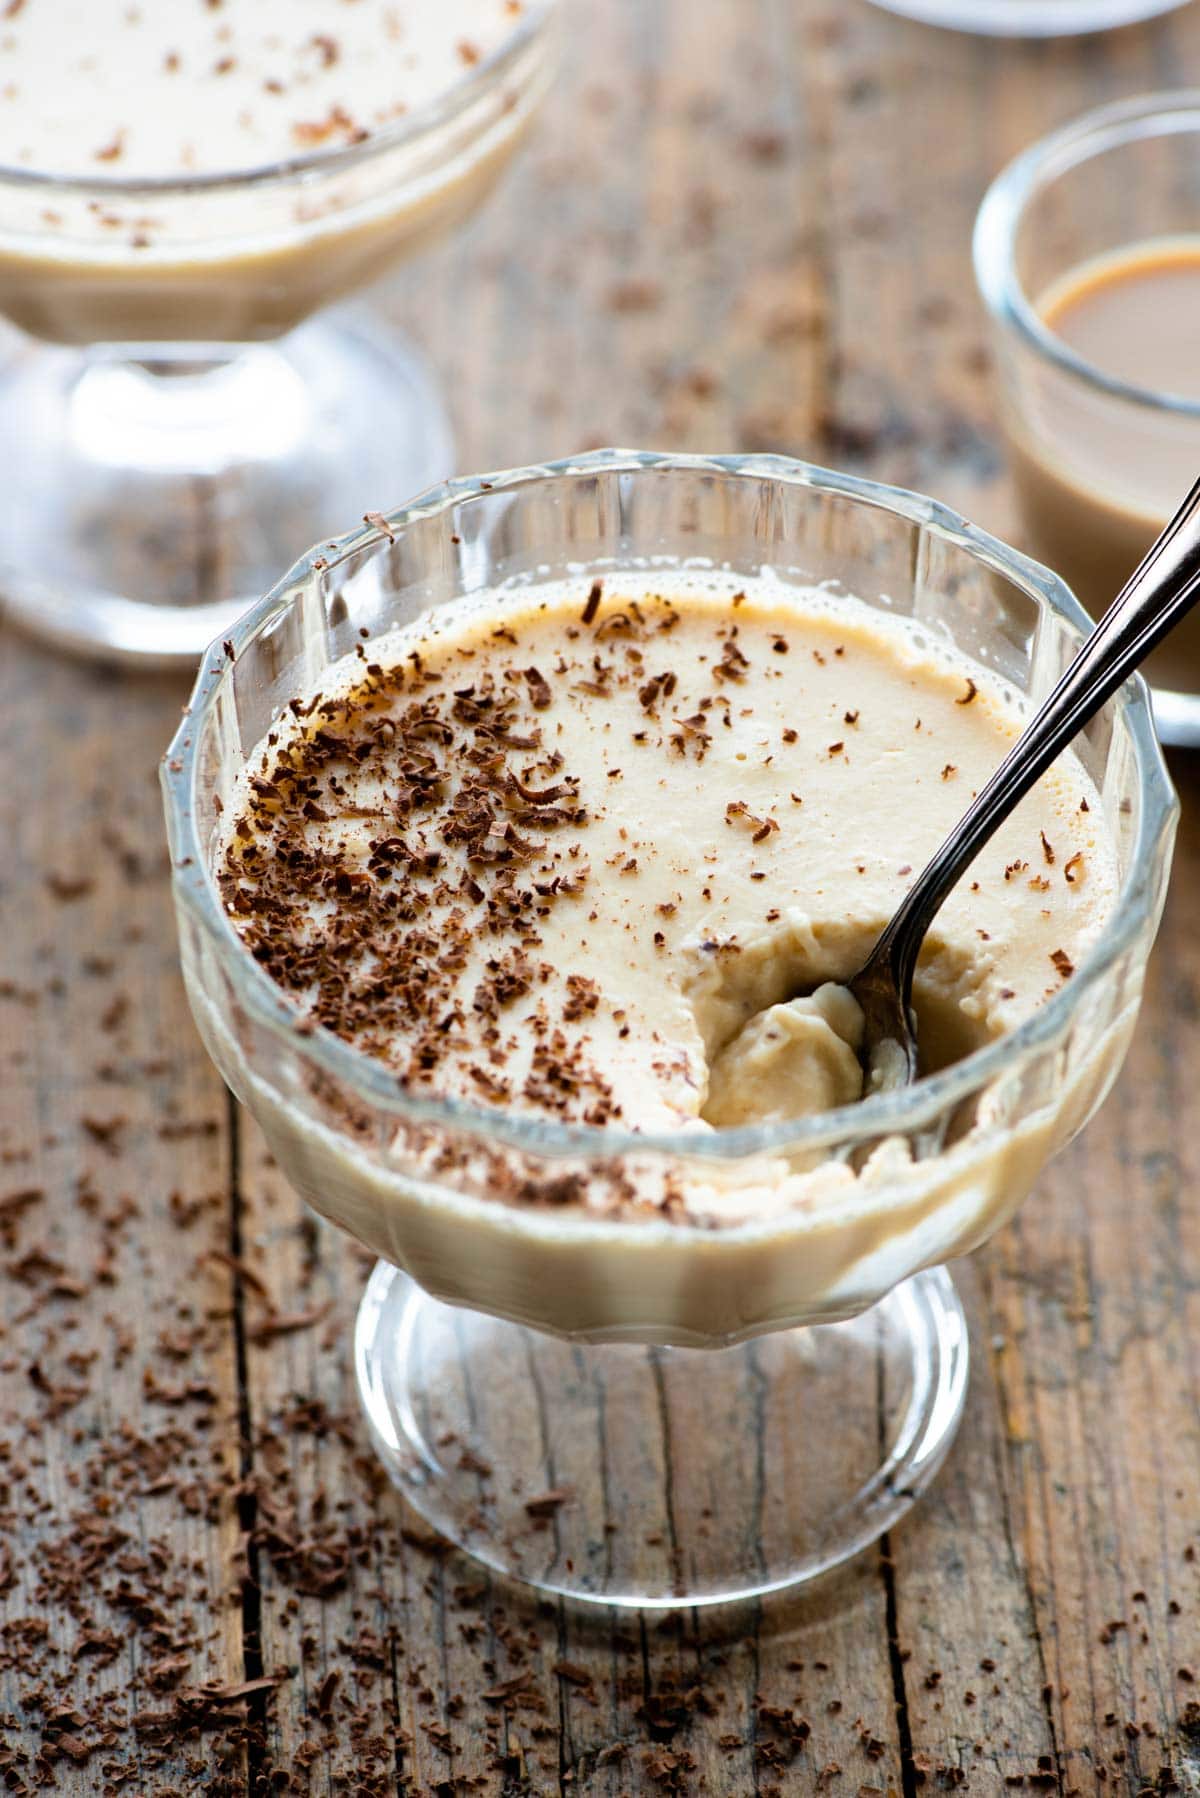 Baileys panna cotta in a small glass dish with a spoon and grated chocolate on top